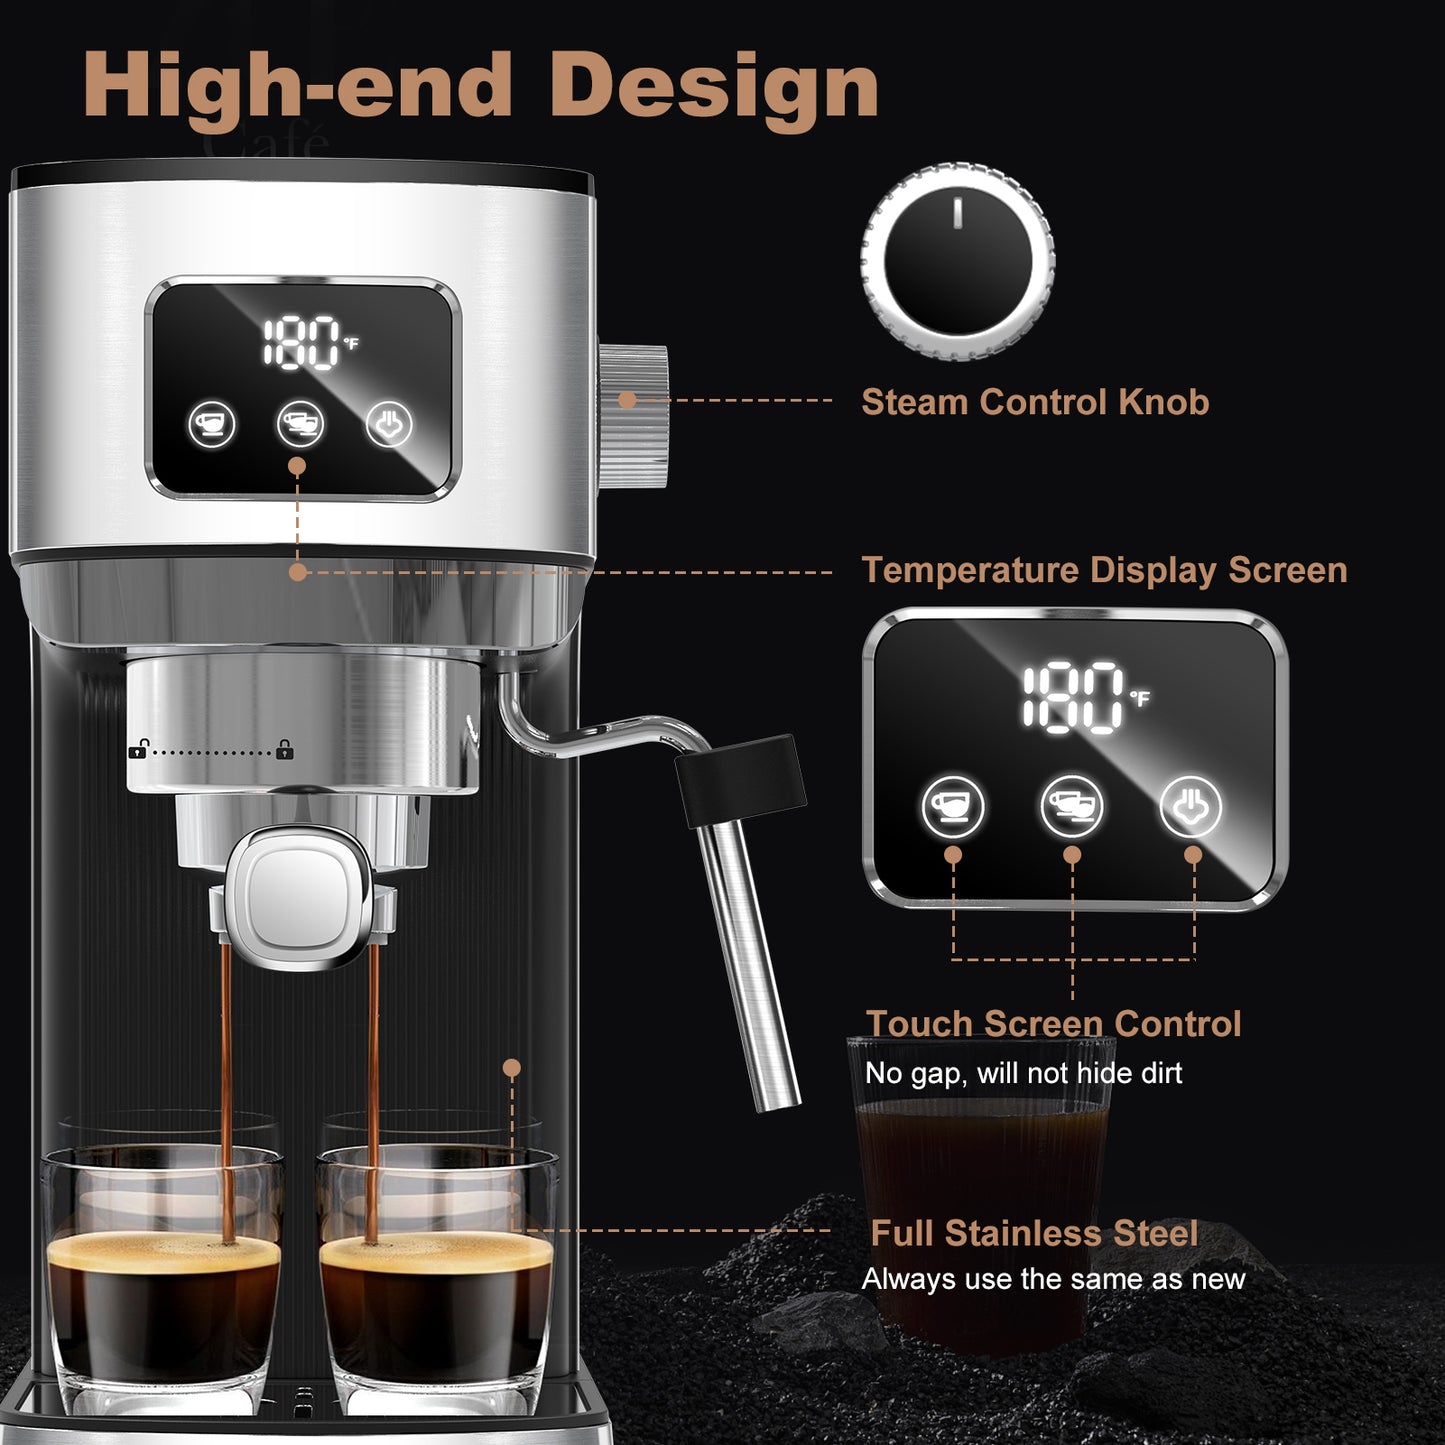 Geek Chef Espresso Machine,20 bar espresso machine with milk frother for latte,cappuccino, household espresso maker,1.1L Water Tank,Stainless Steel